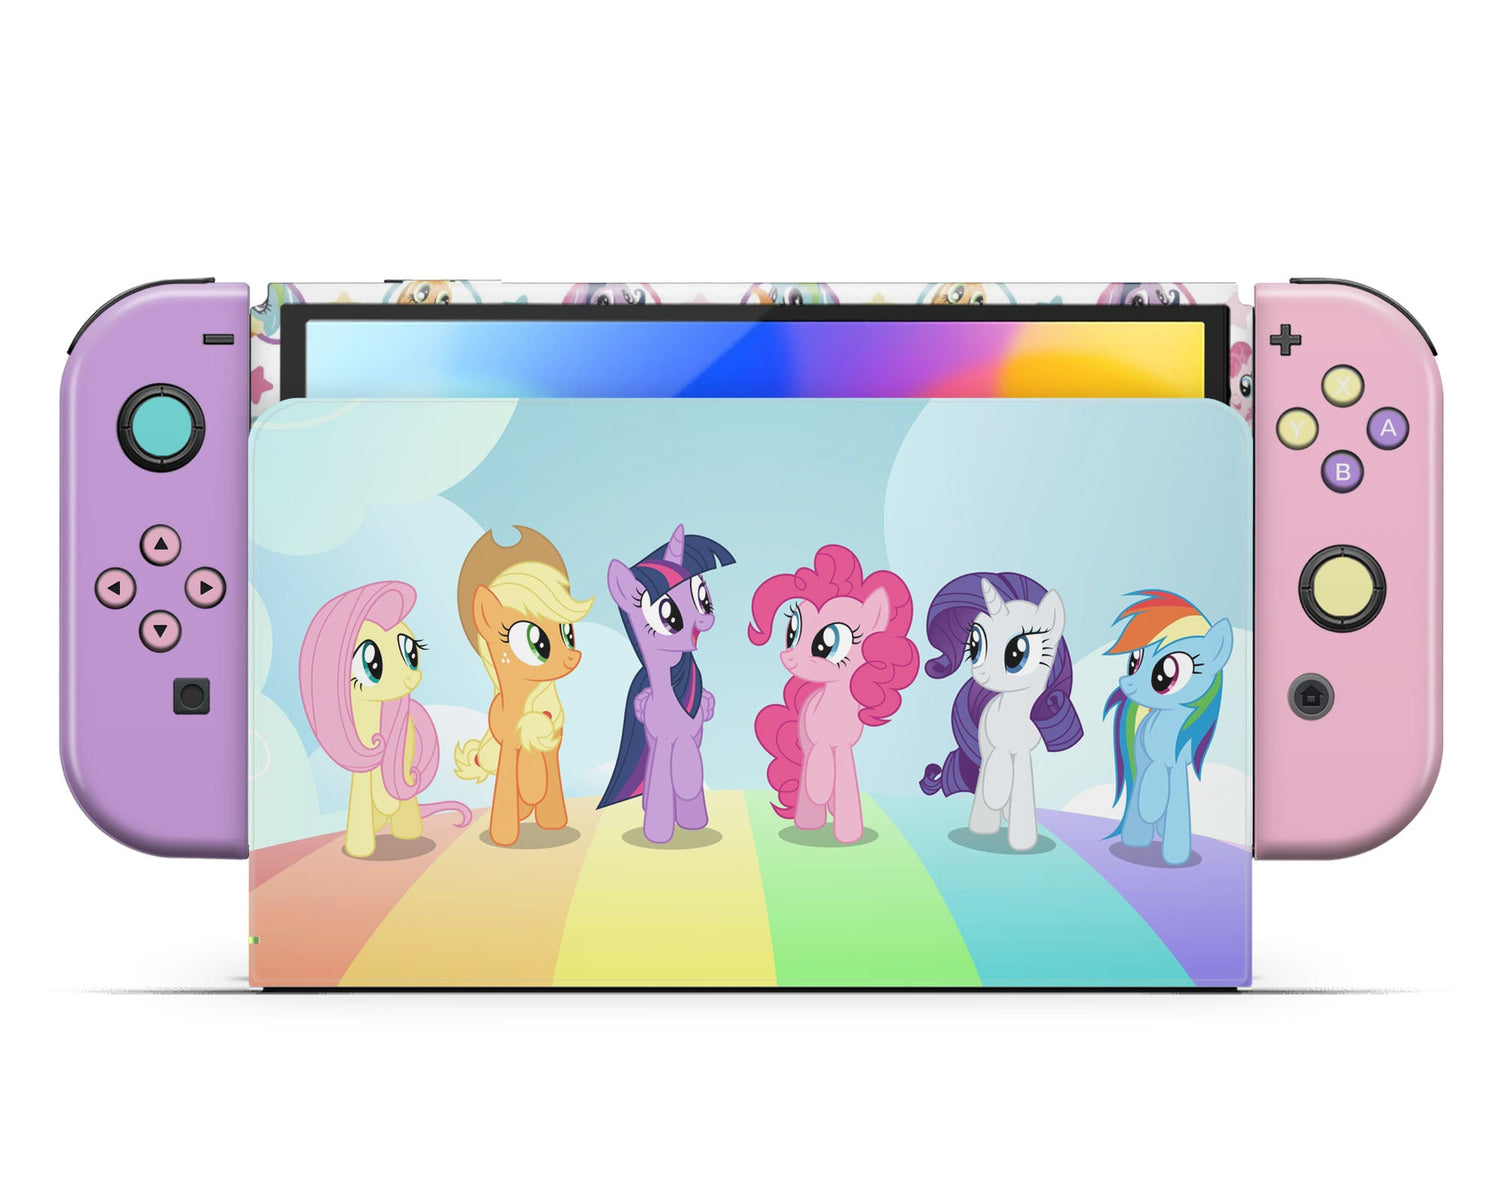 Lux Skins Nintendo Switch OLED My Little Pony Full Set +Tempered Glass Skins - Pop culture My Little Pony Skin